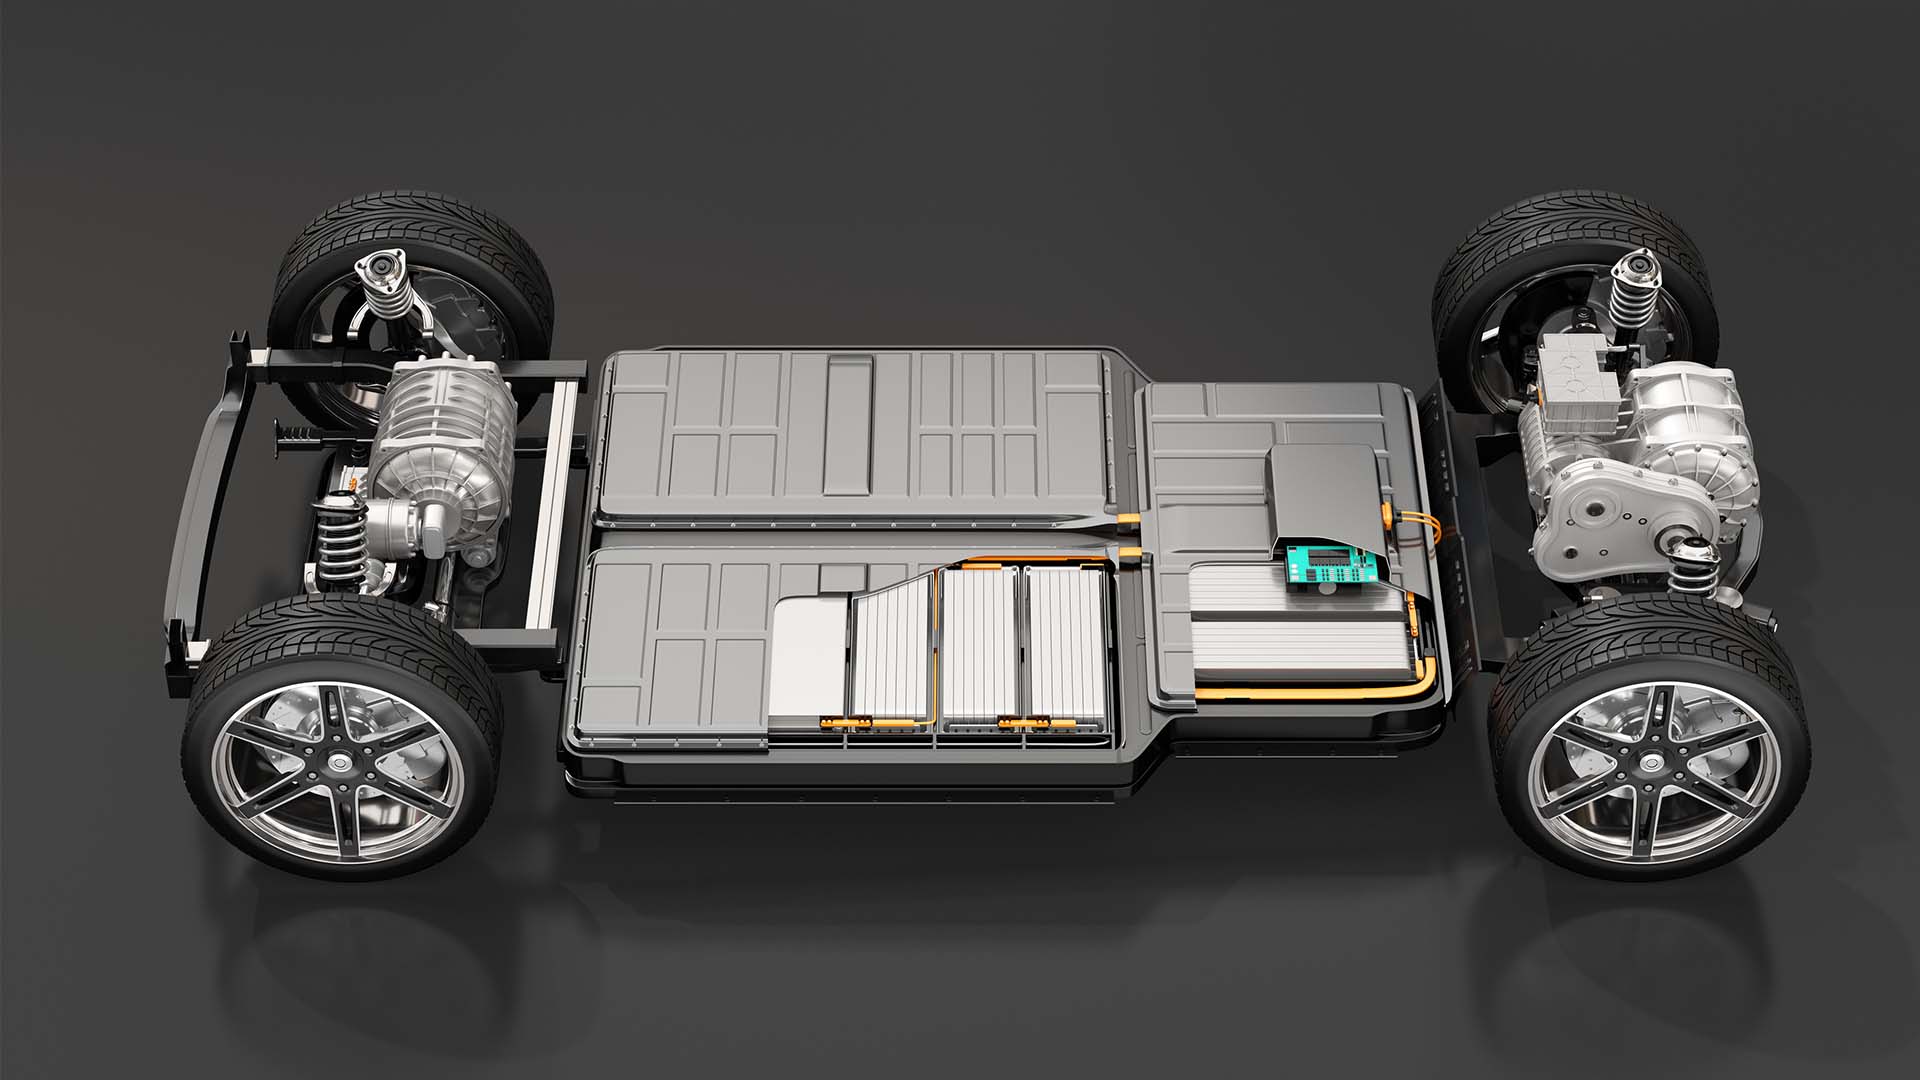 An electric vehicle chassis